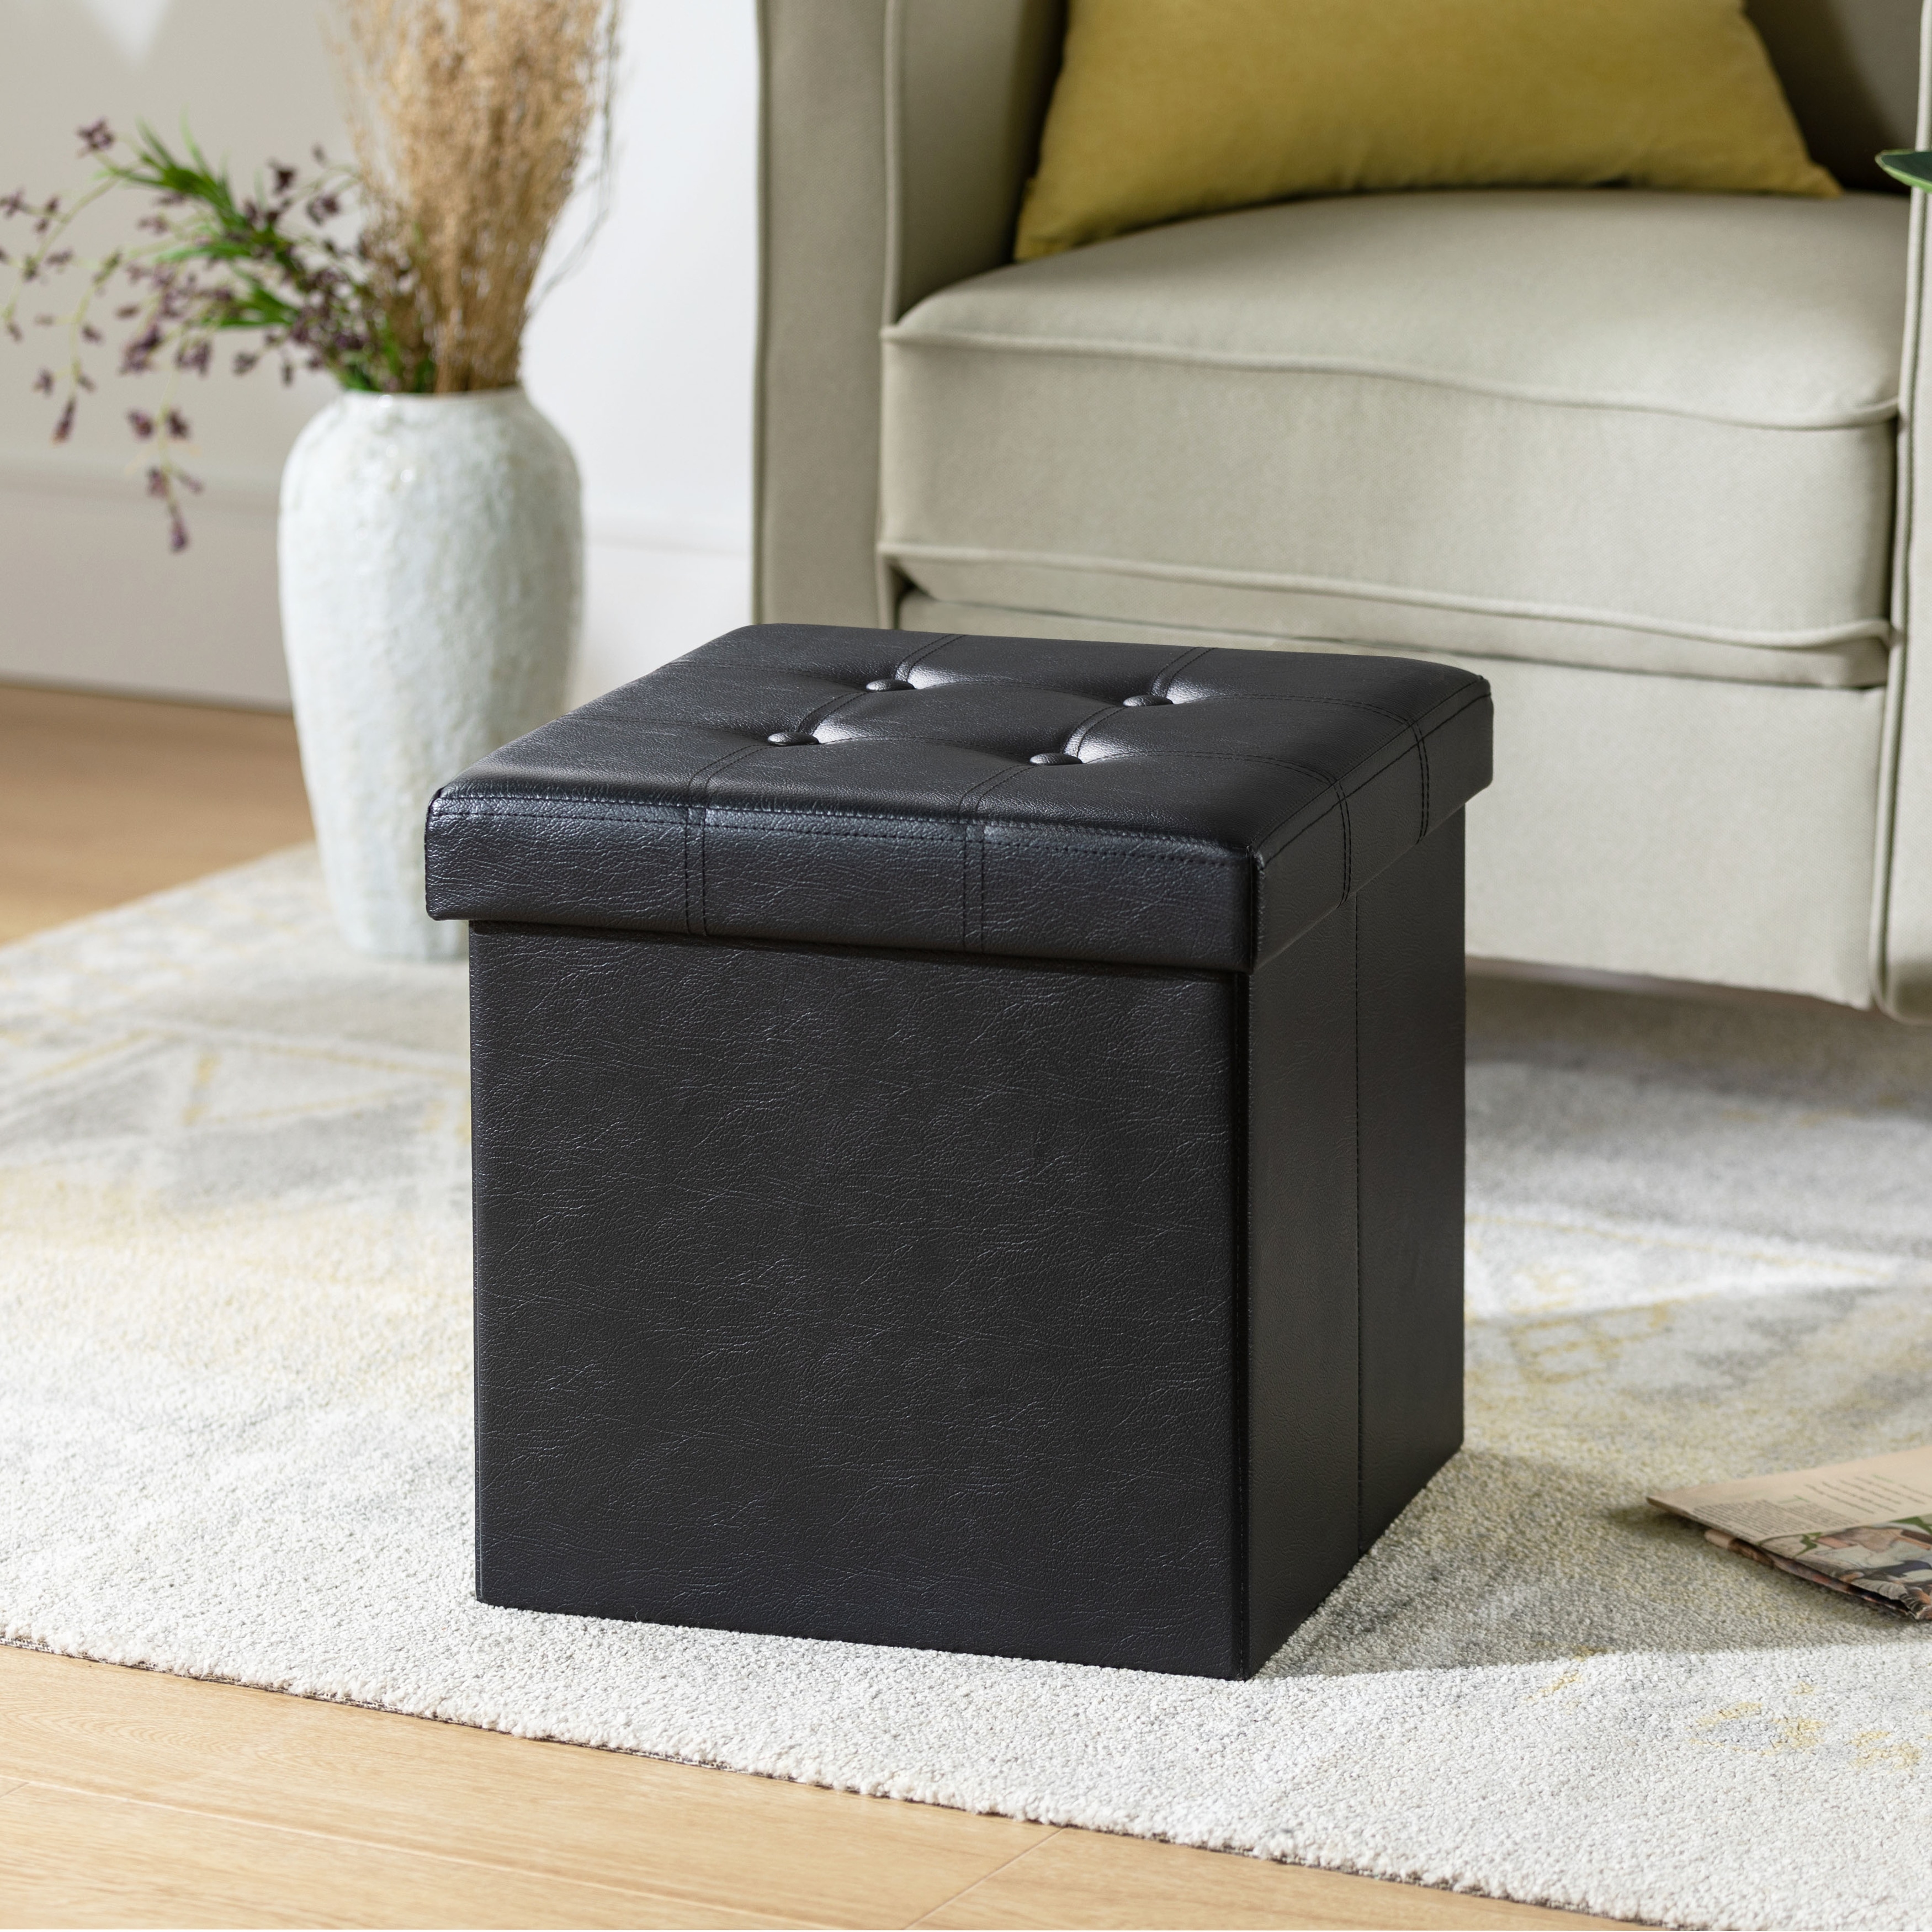 https://ak1.ostkcdn.com/images/products/is/images/direct/963f446233e24aa58abe68e541a2f44ecbcb851a/15-Inch-Button-Tufted-Faux-Leather-Collapsible-Storage-Ottoman-By-Crown-Comfort.jpg